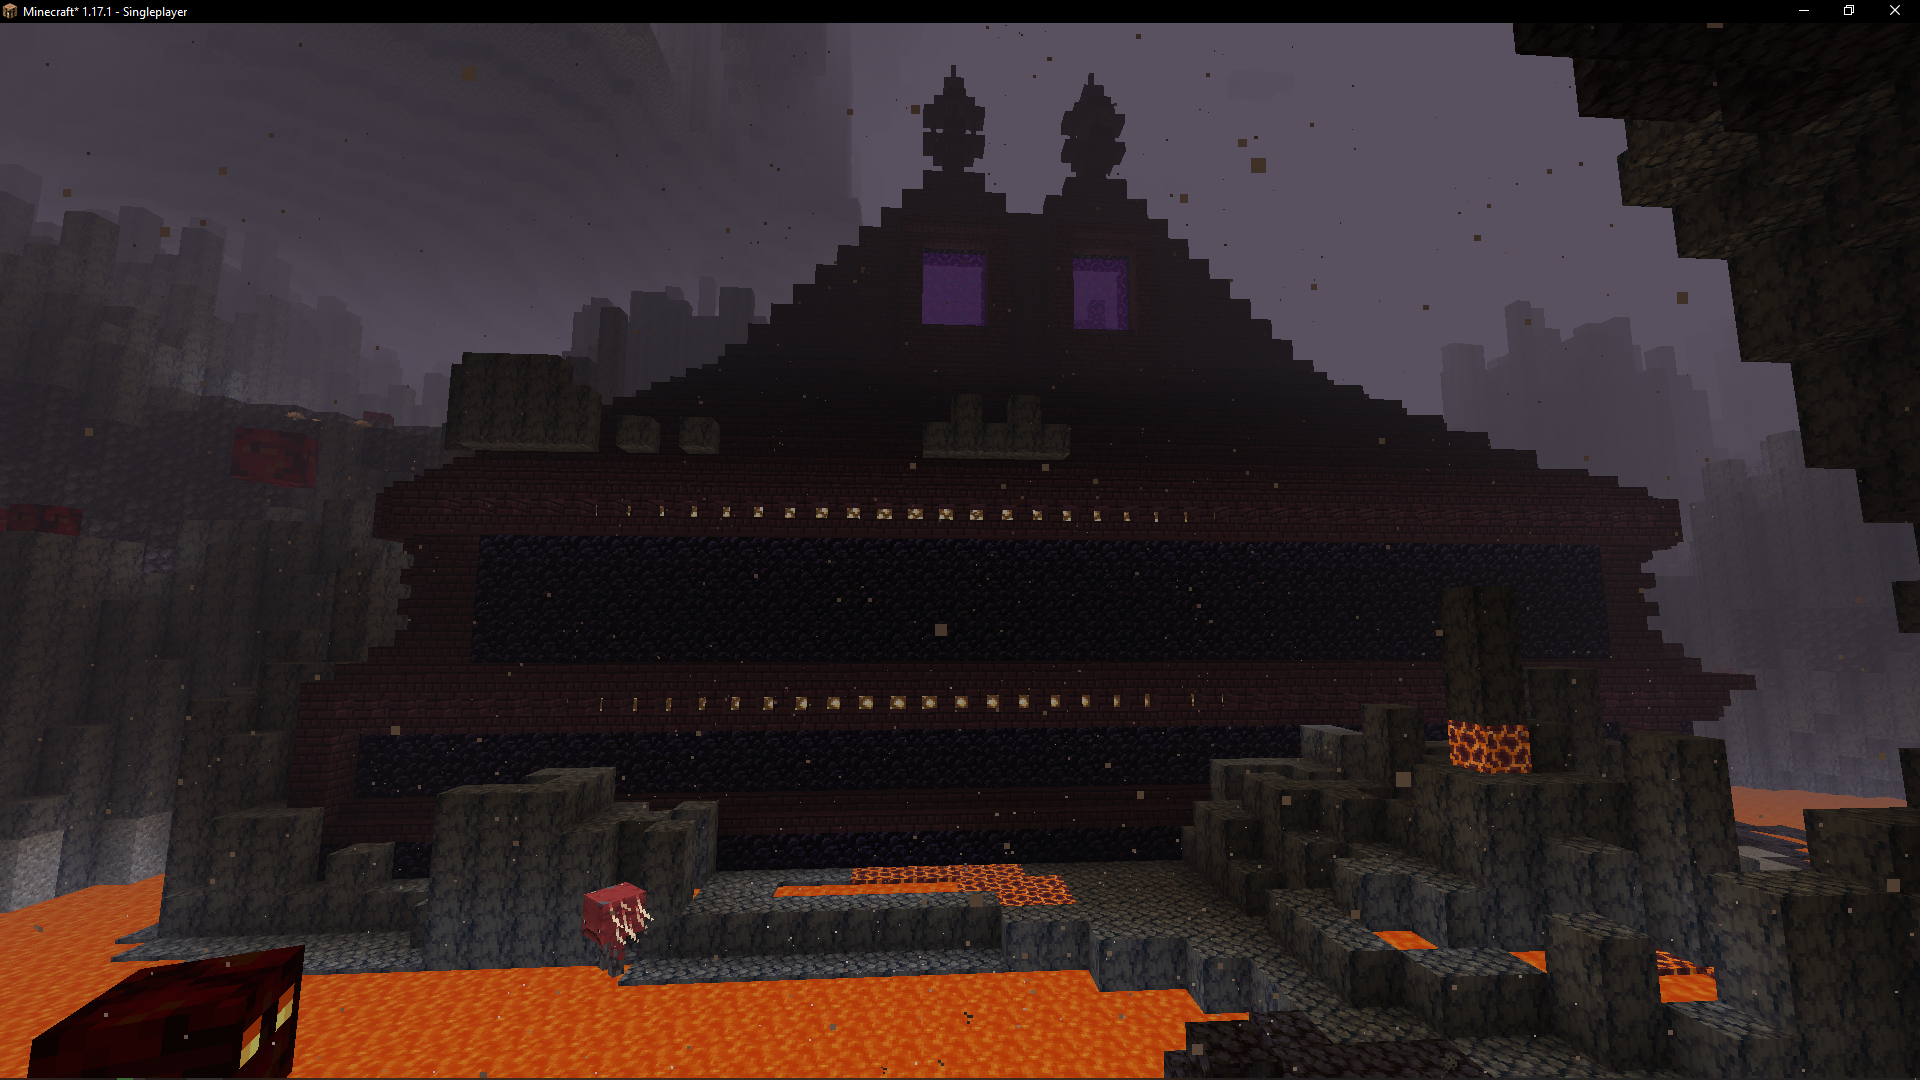 Awesome Dungeon Nether screenshot 3